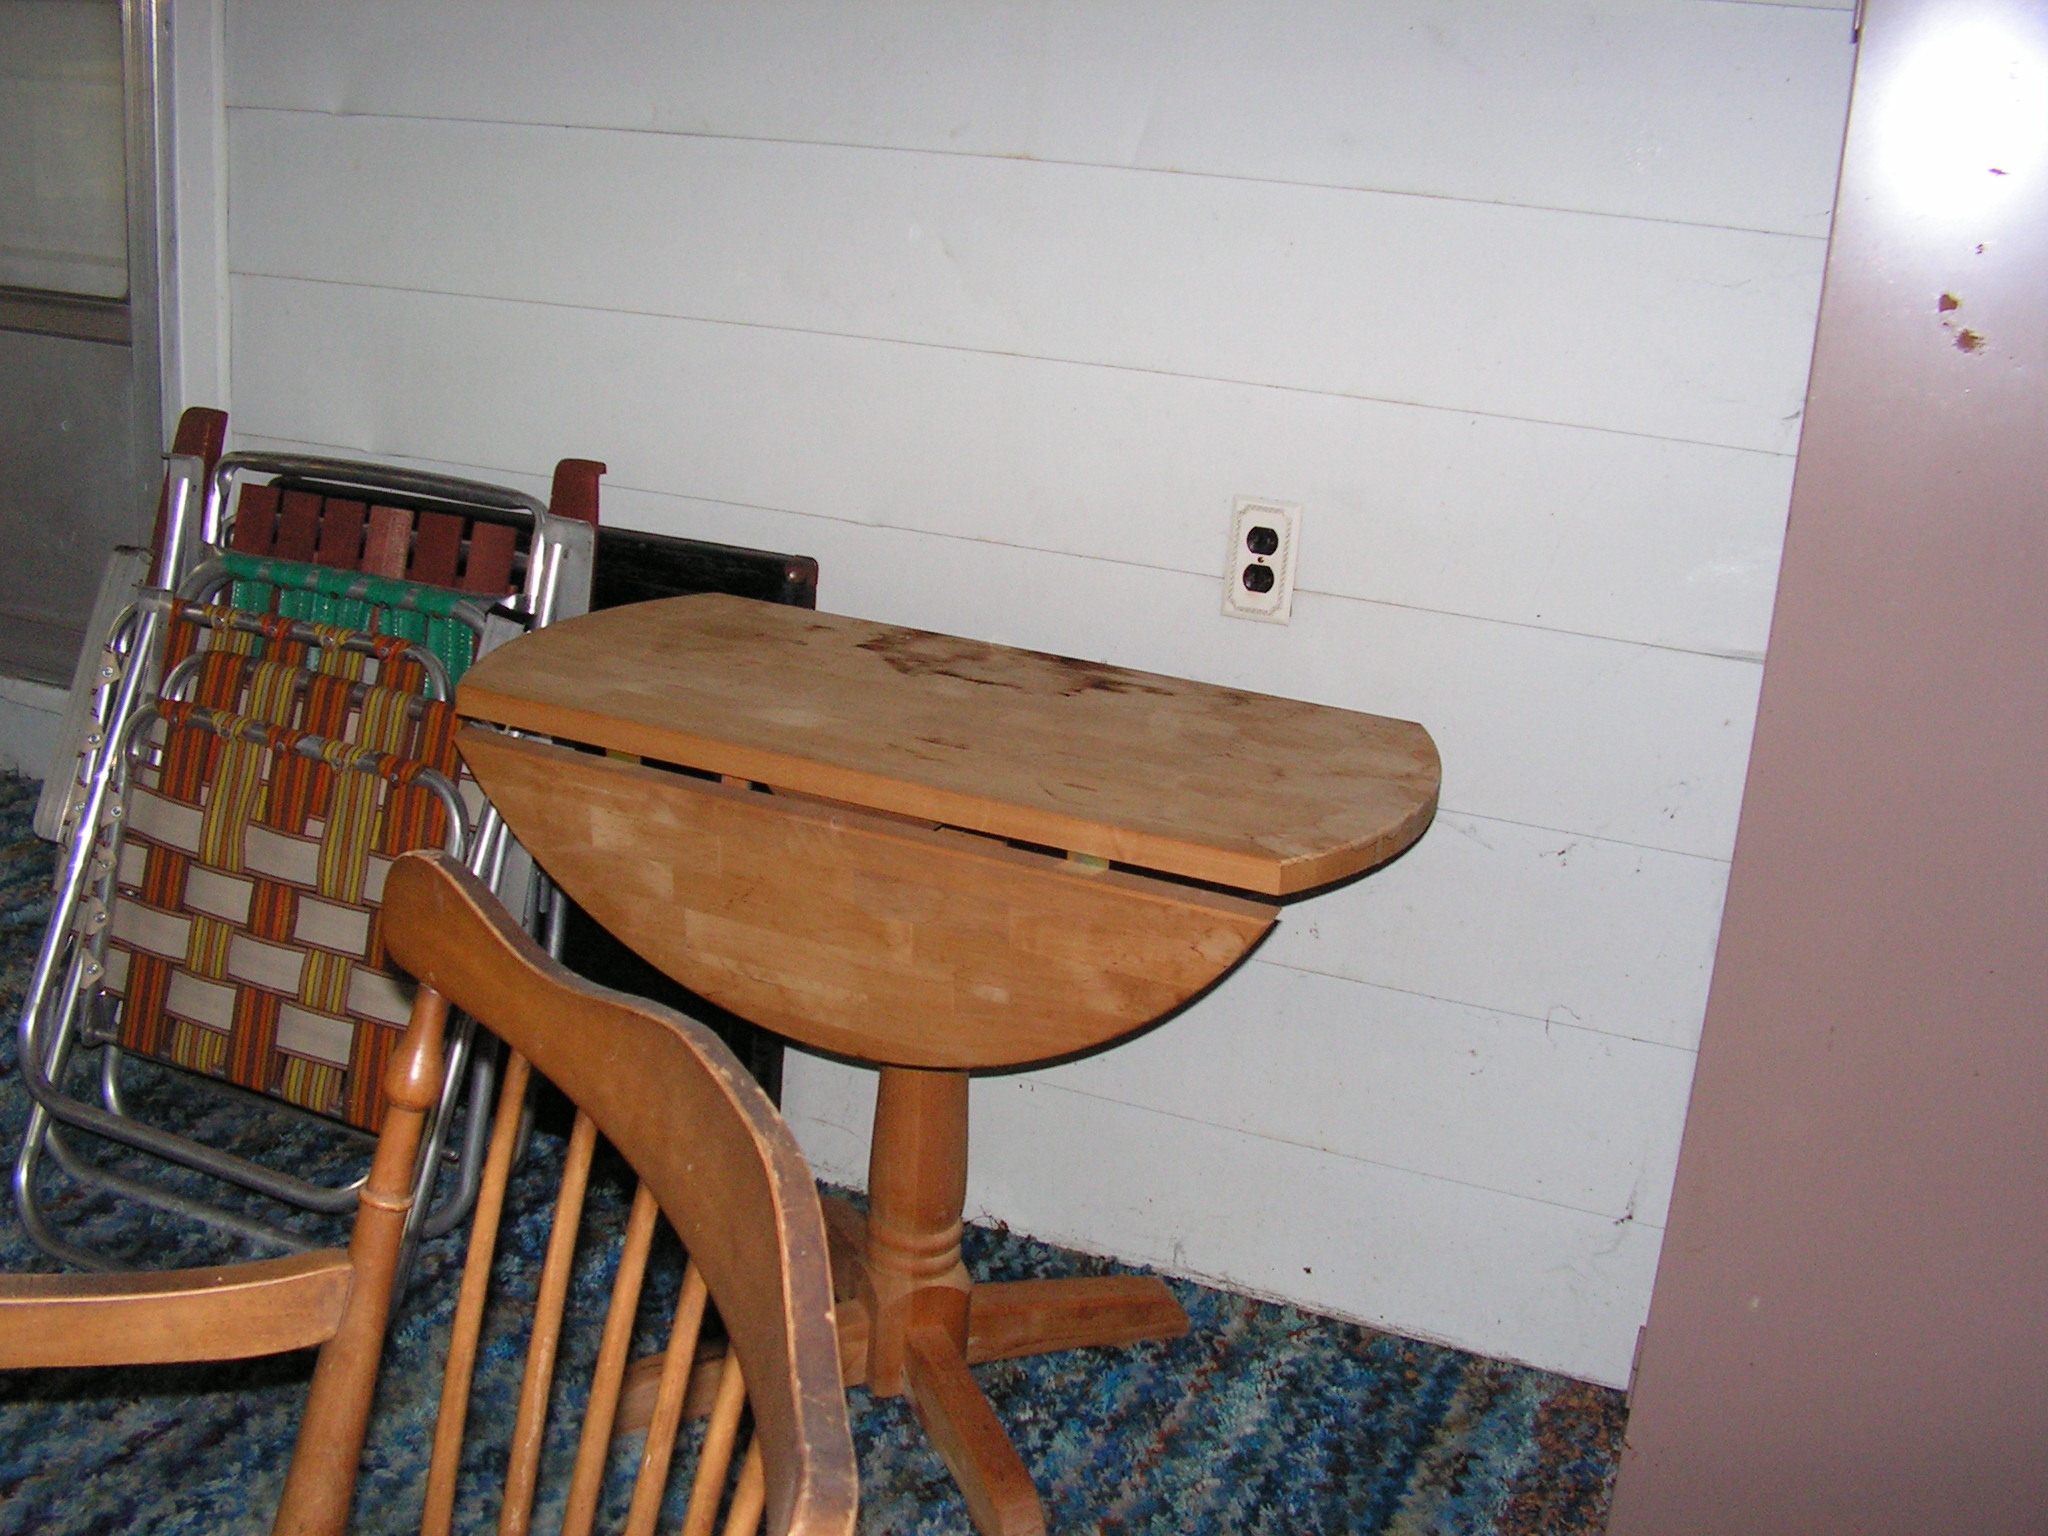 Round Wood Drop leaf table - - - > SOLD!